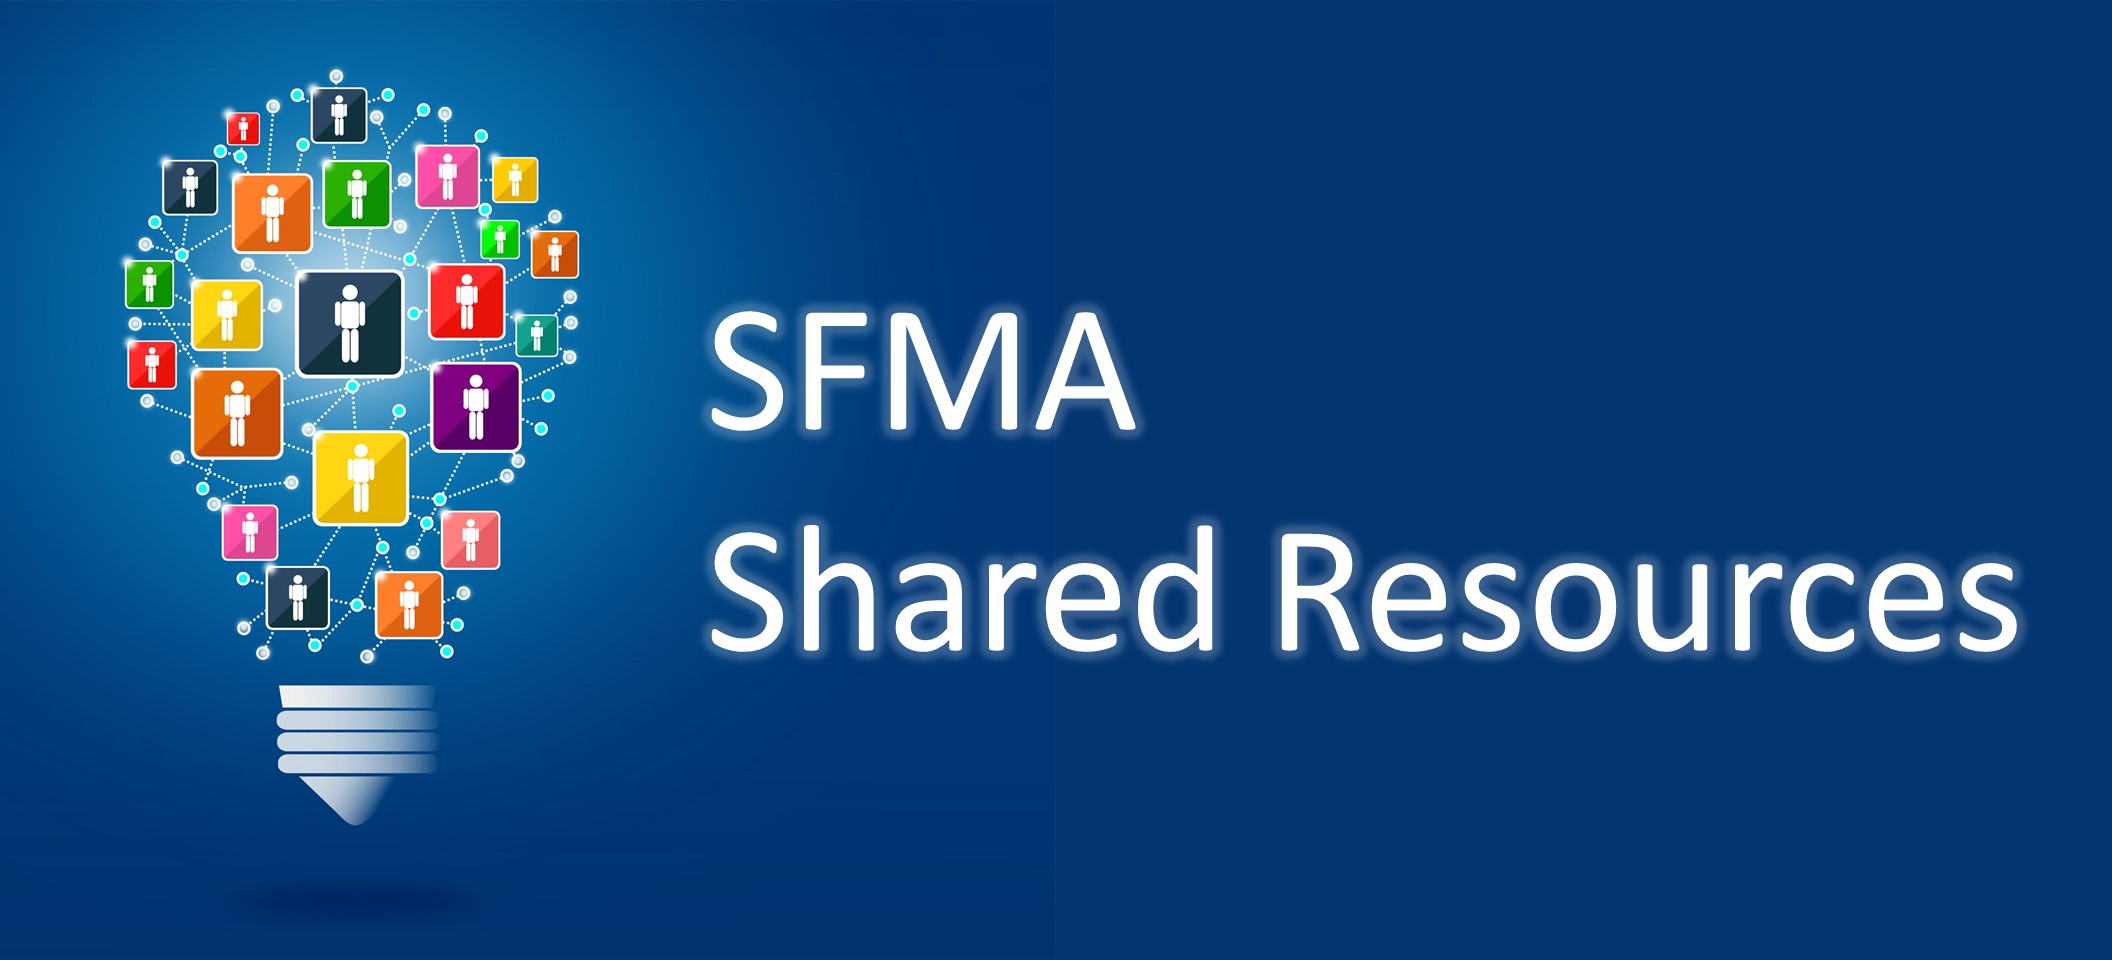 SFMA Shared Resources